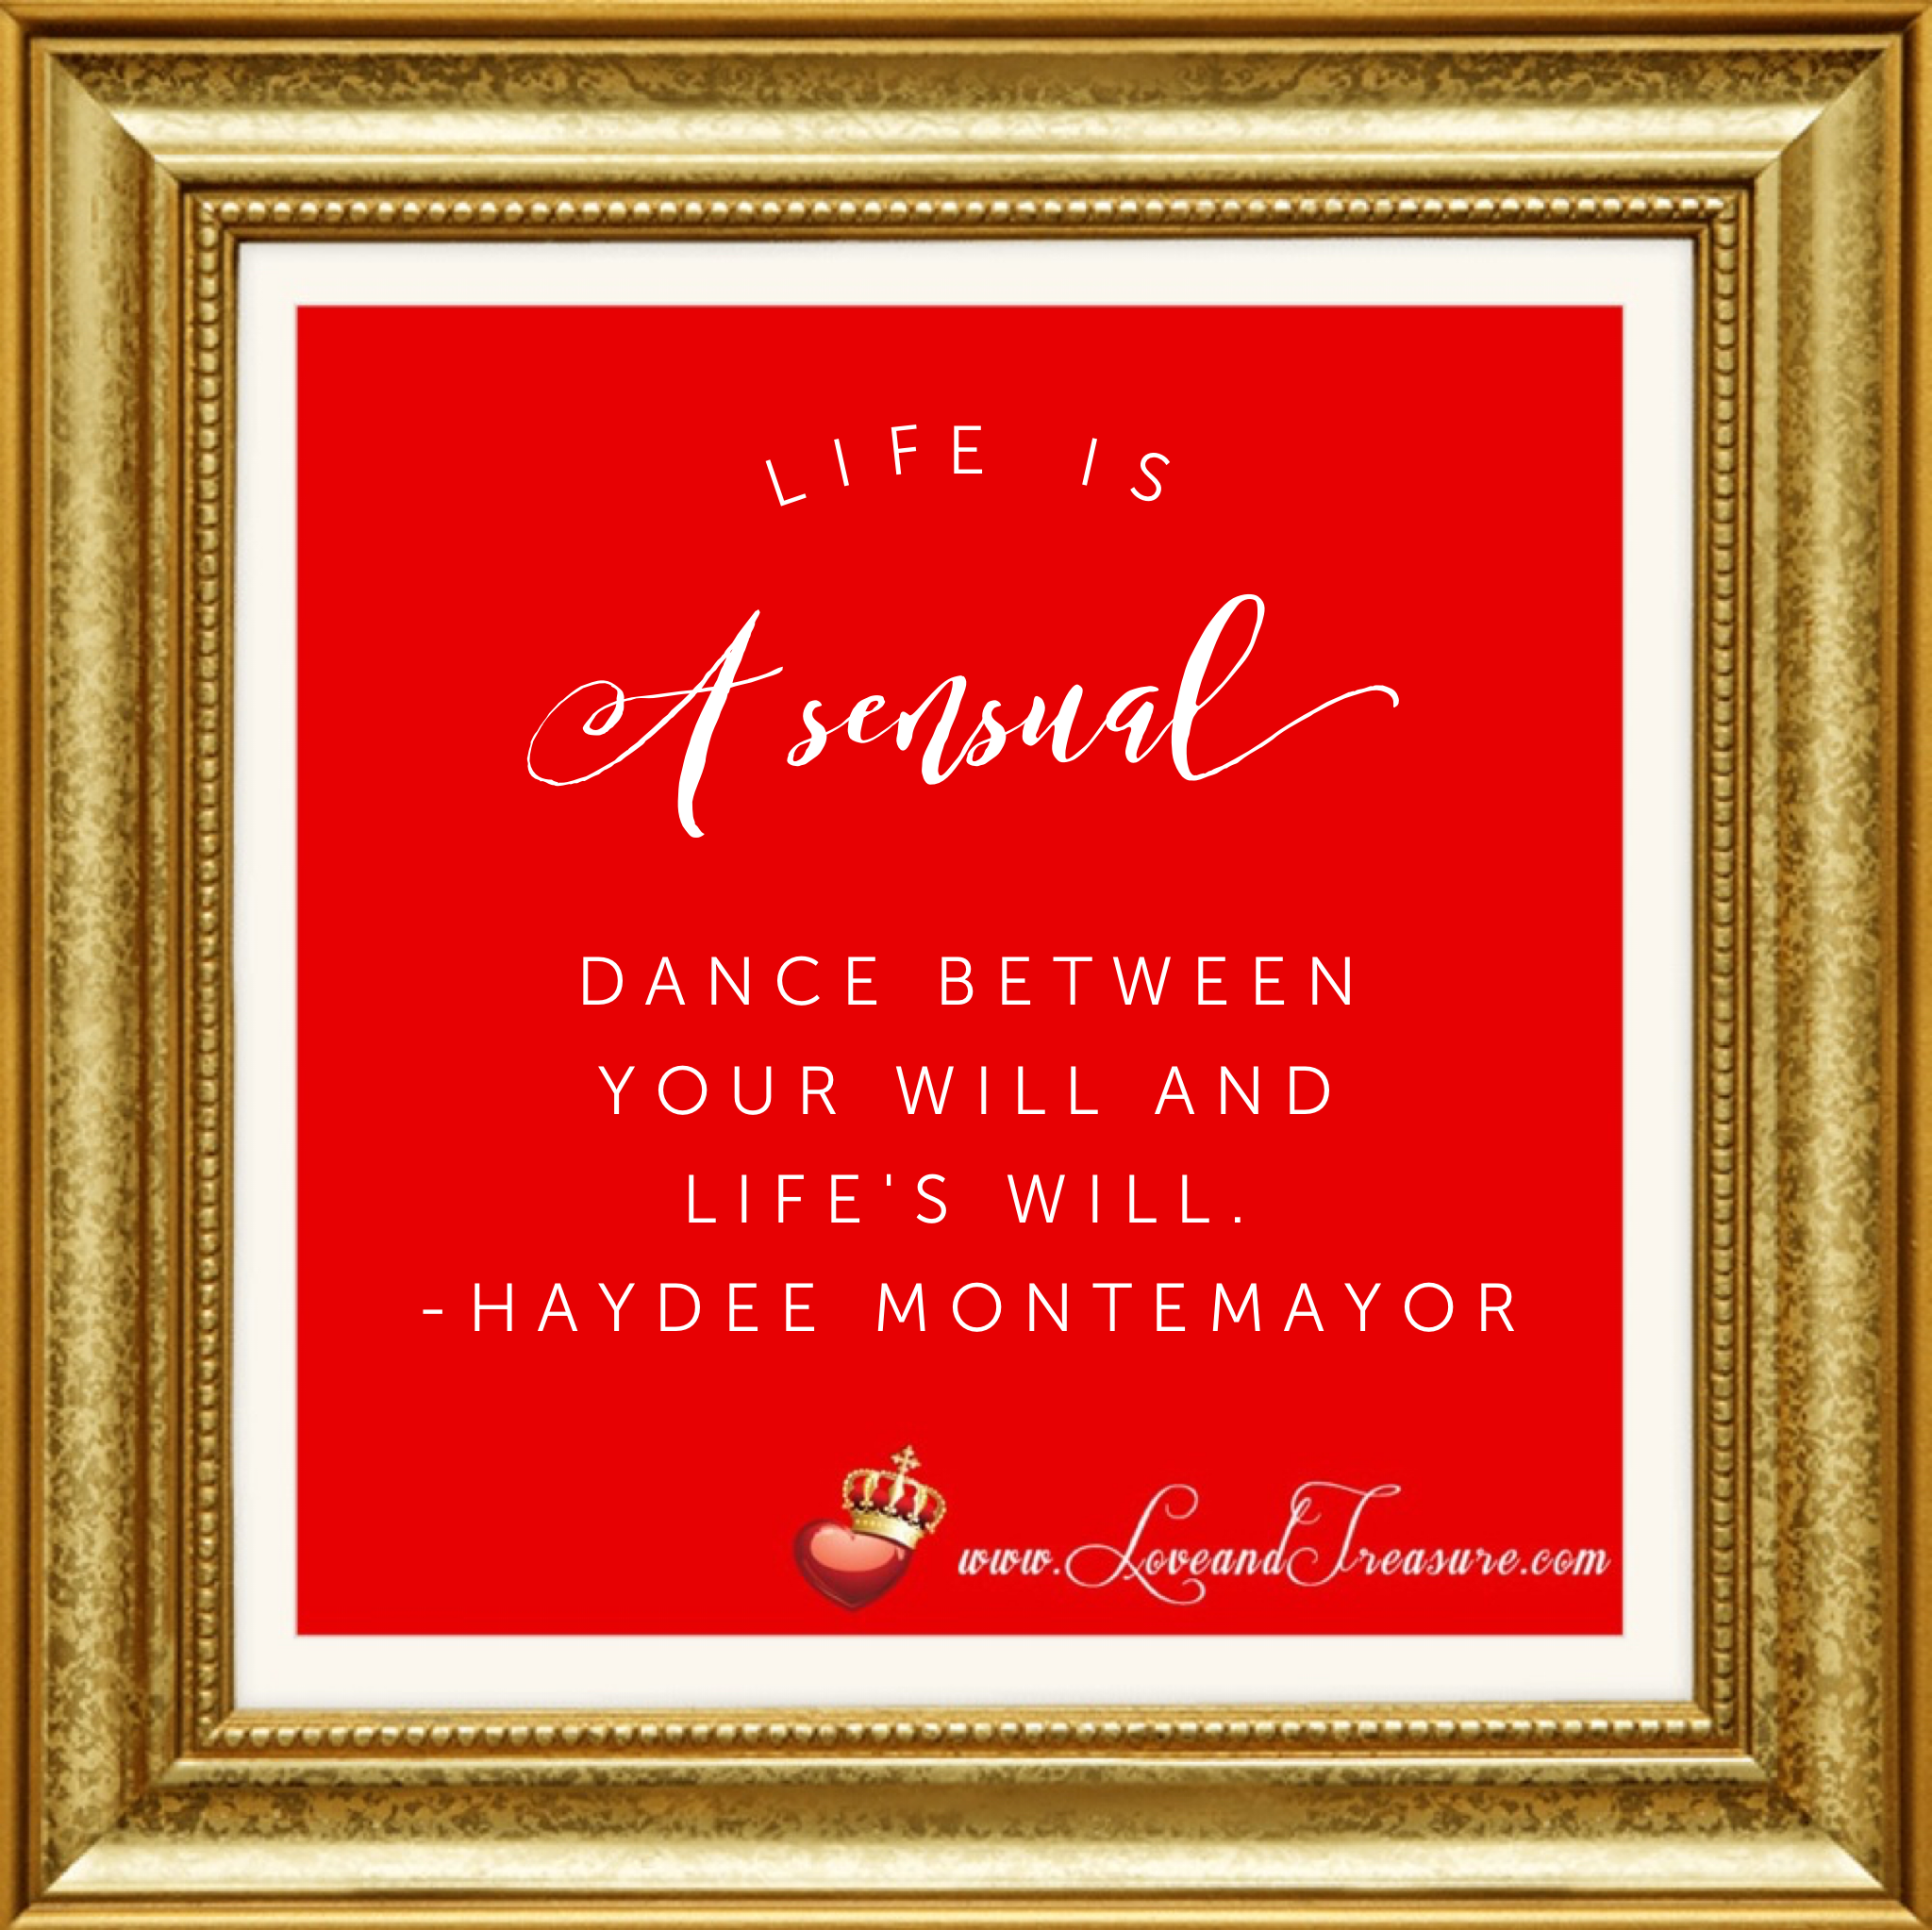 Life is a sensual dance between your will and life's will. Quotation by Haydee Montemayor from Love and Treasure blog at www.loveandtreasure.com